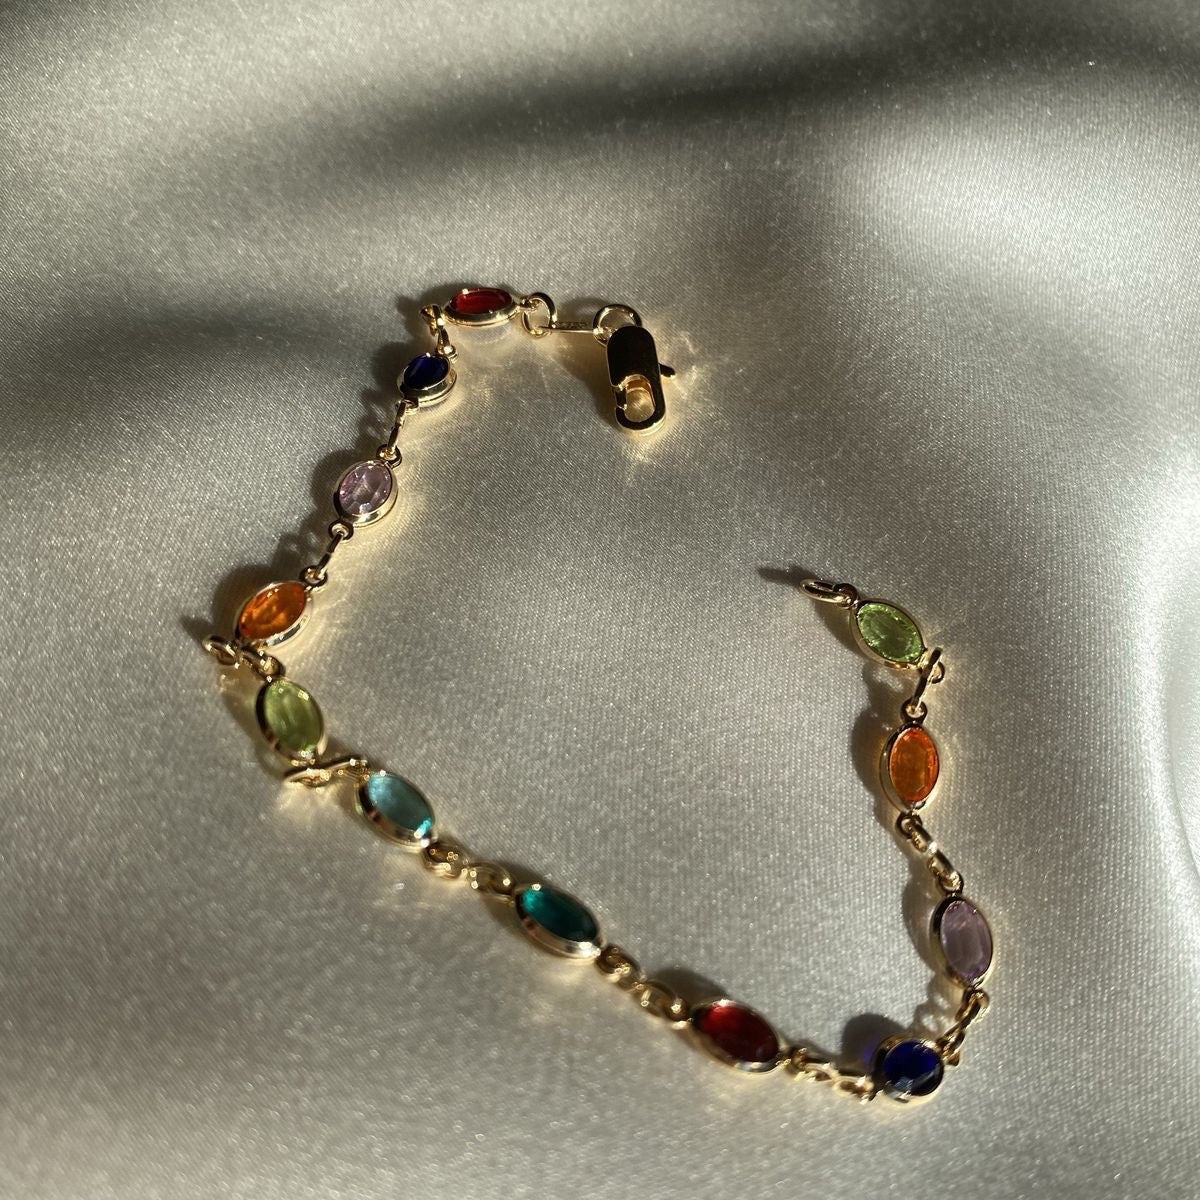 Crystal Beads Drop Anklet